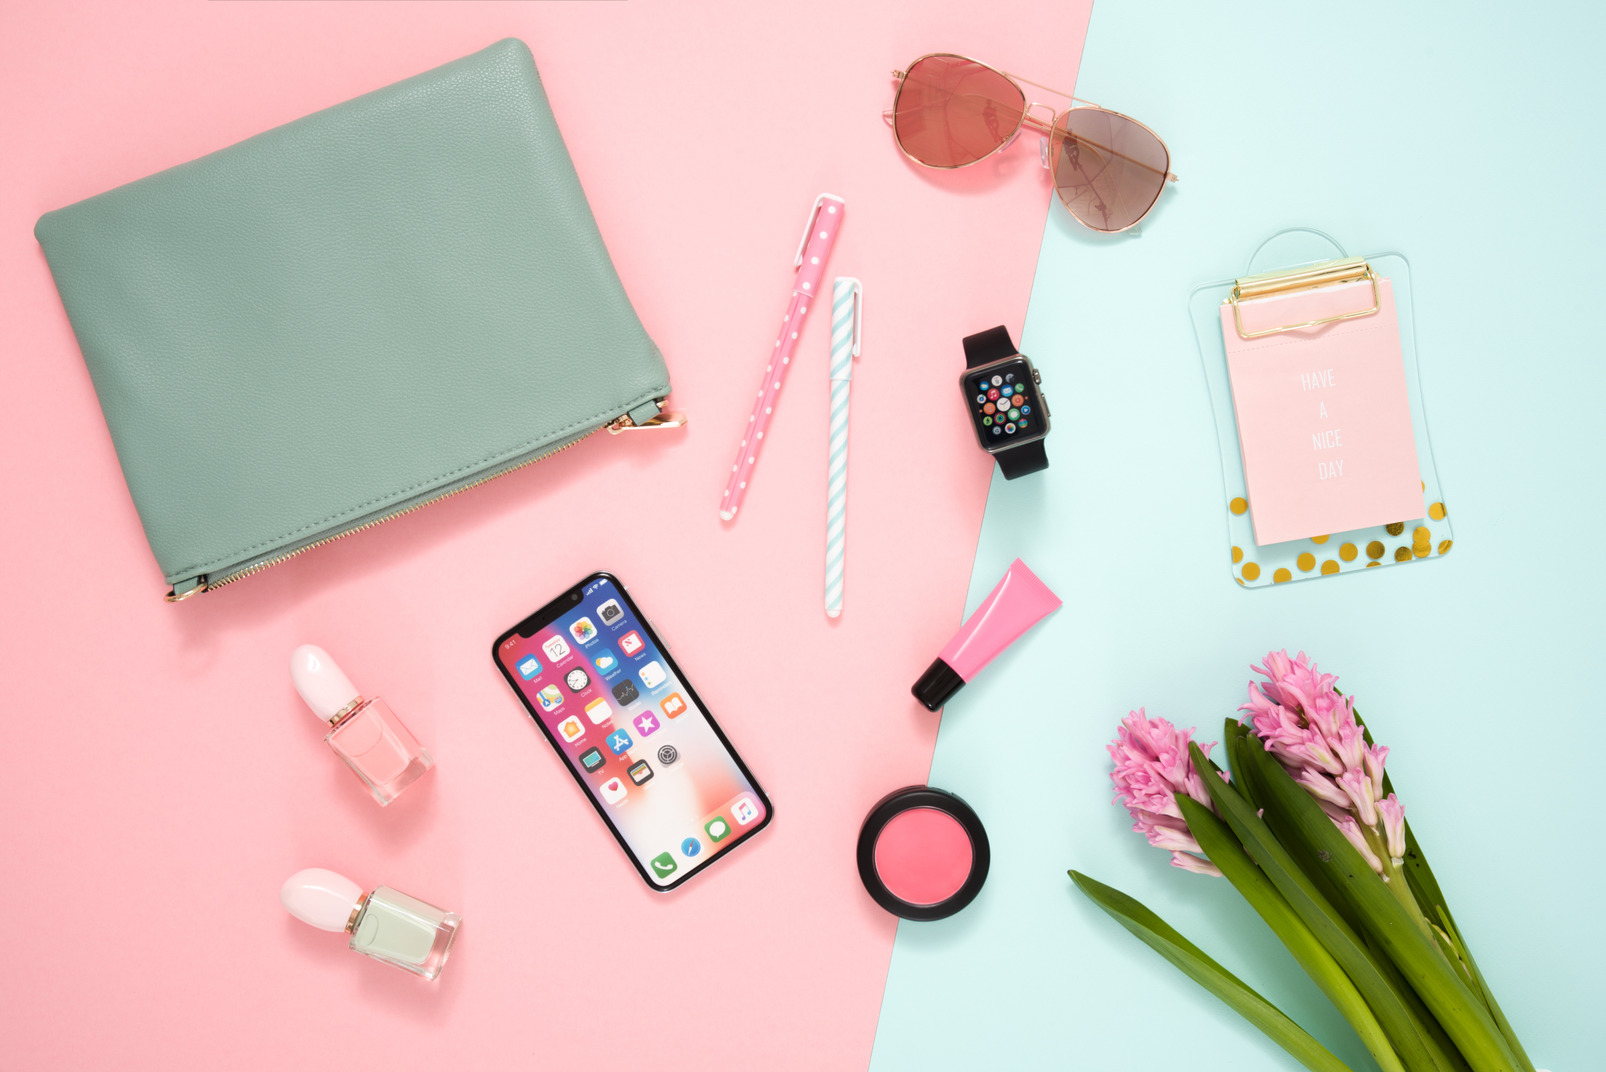 In her handbag: from cosmetics to smartwatch